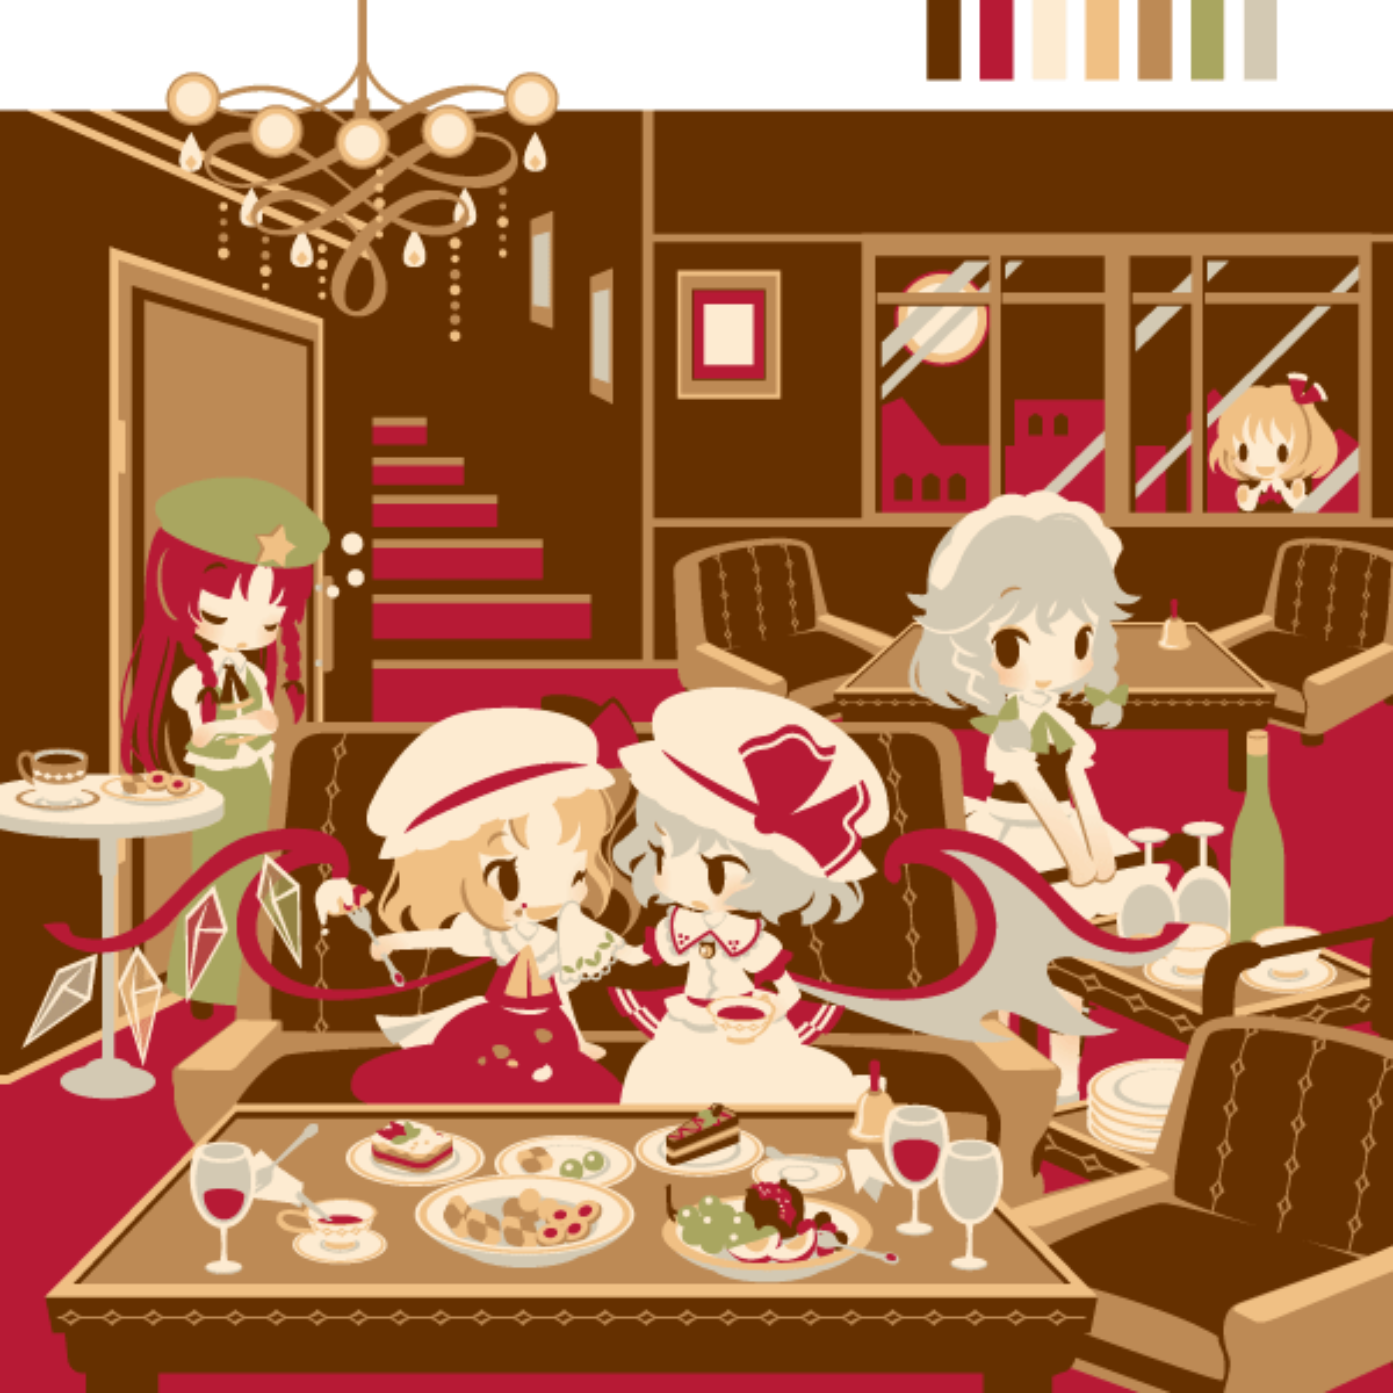 Anime 1393x1393 anime anime girls Touhou Flandre Scarlet Remilia Scarlet Izayoi Sakuya Rumia Hong Meiling stairs sweets drink couch window chandeliers grapes fork